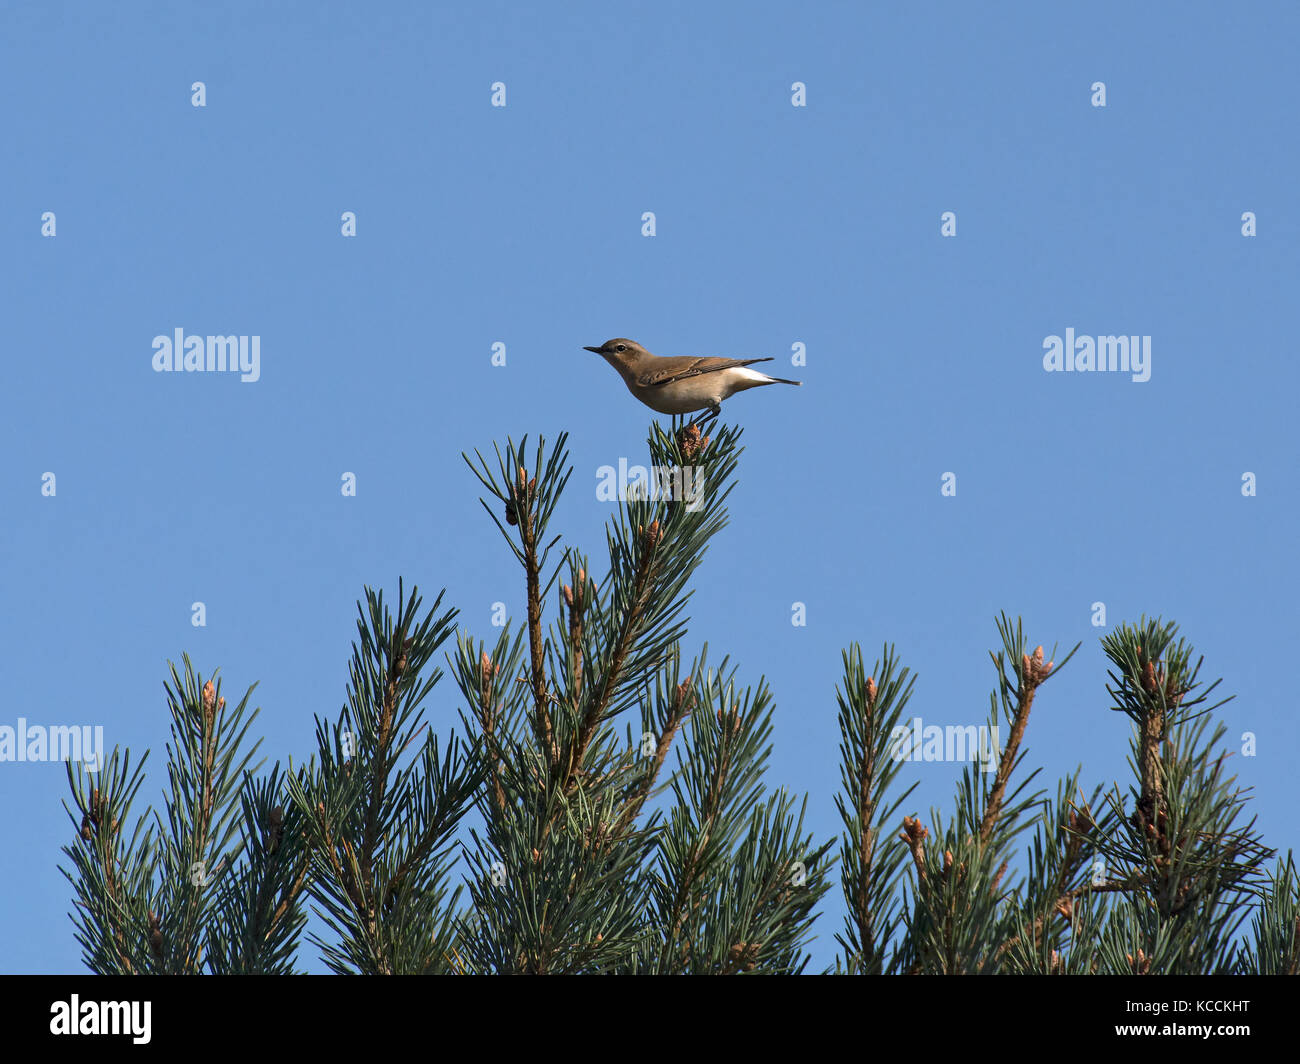 Wheatear, Oenanthe oenanthe, female, perched on conifer against a plain blue sky in Arne, Dorset, UK Stock Photo